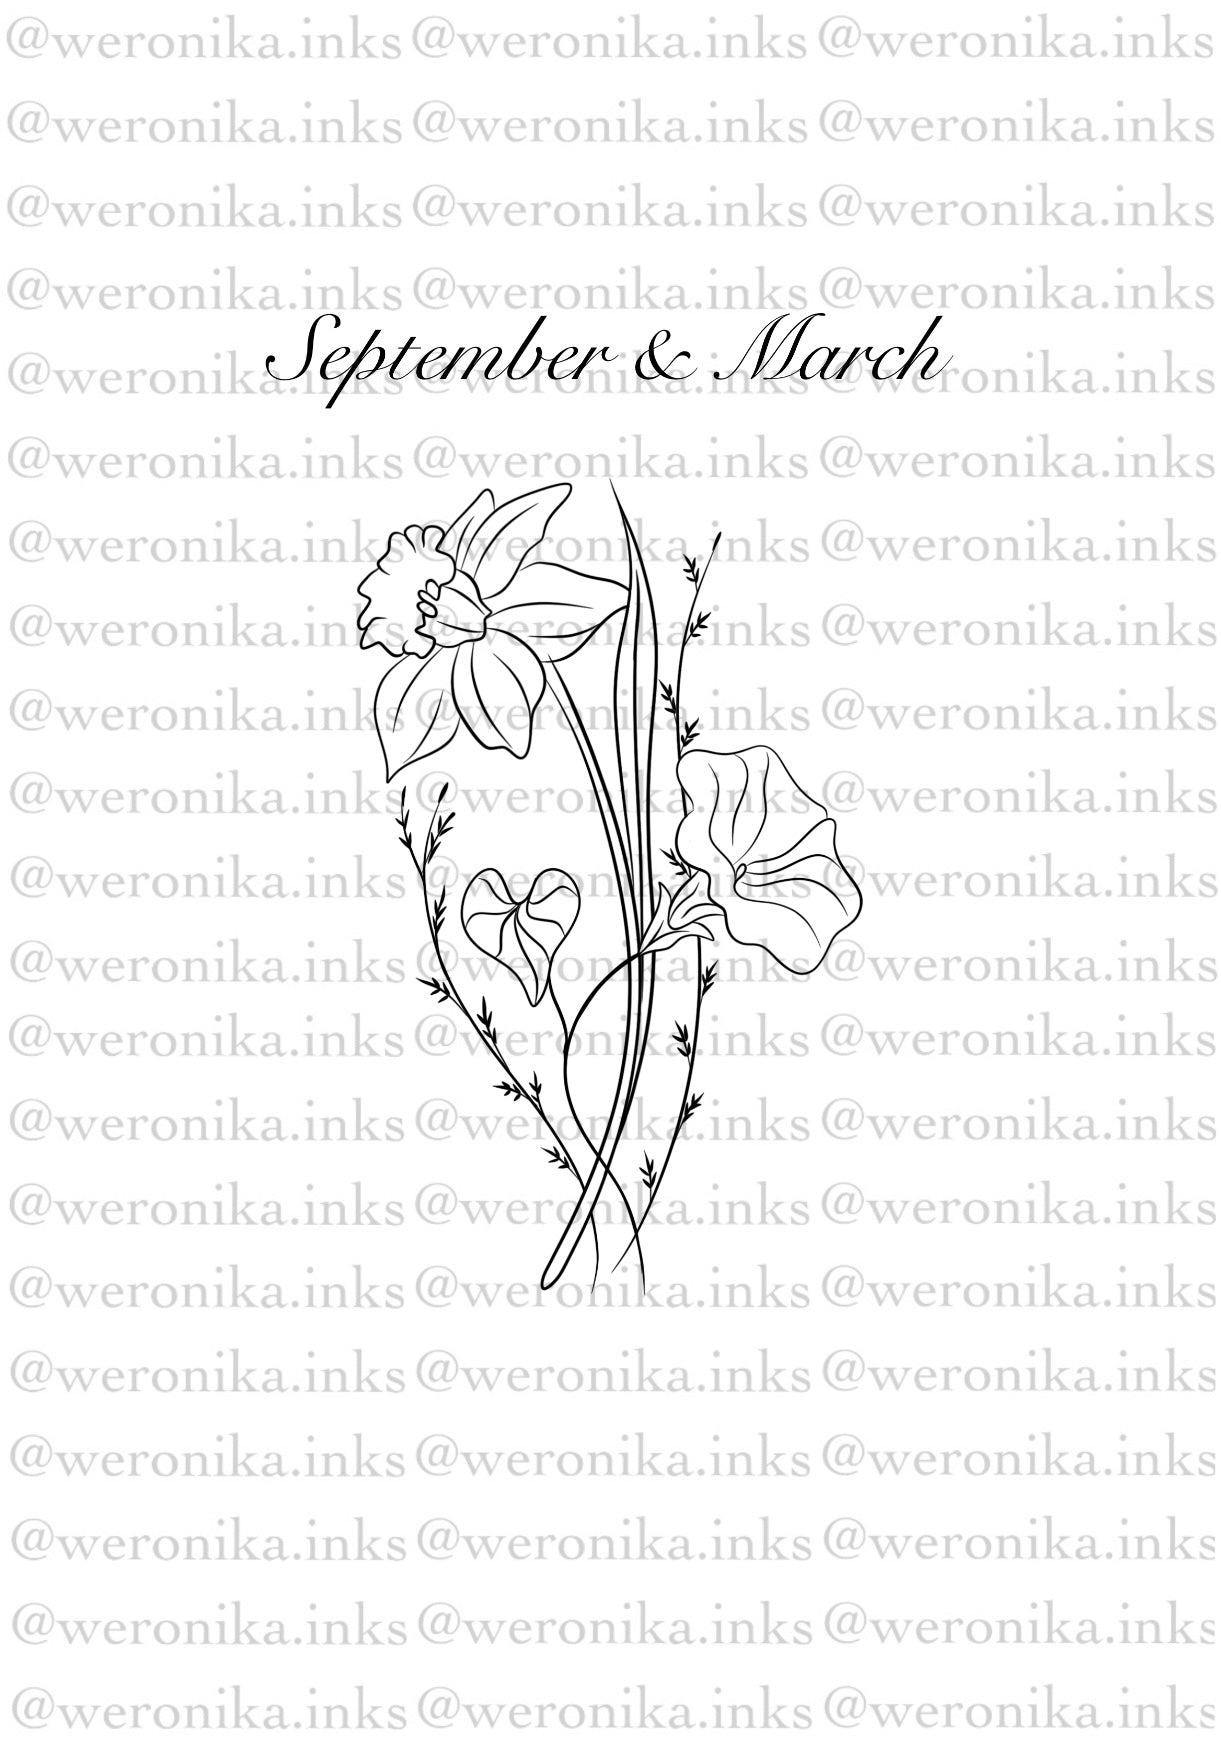 Birth Month Flowers, September & March